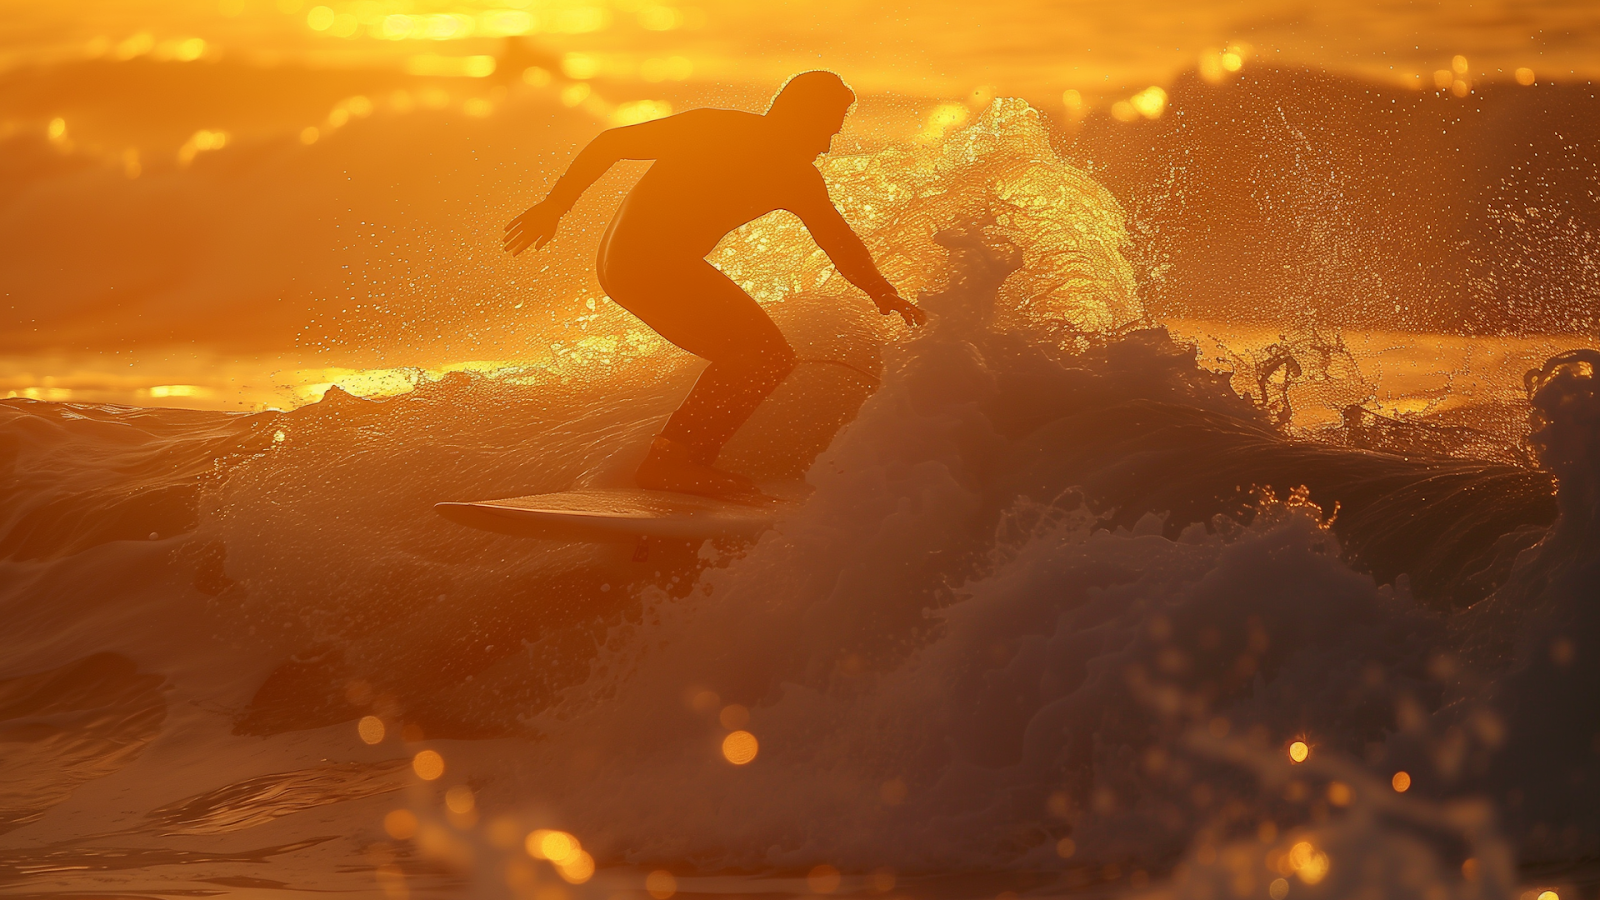 Surfer catching an early wave at Cocoa Beach, Florida, at sunrise.